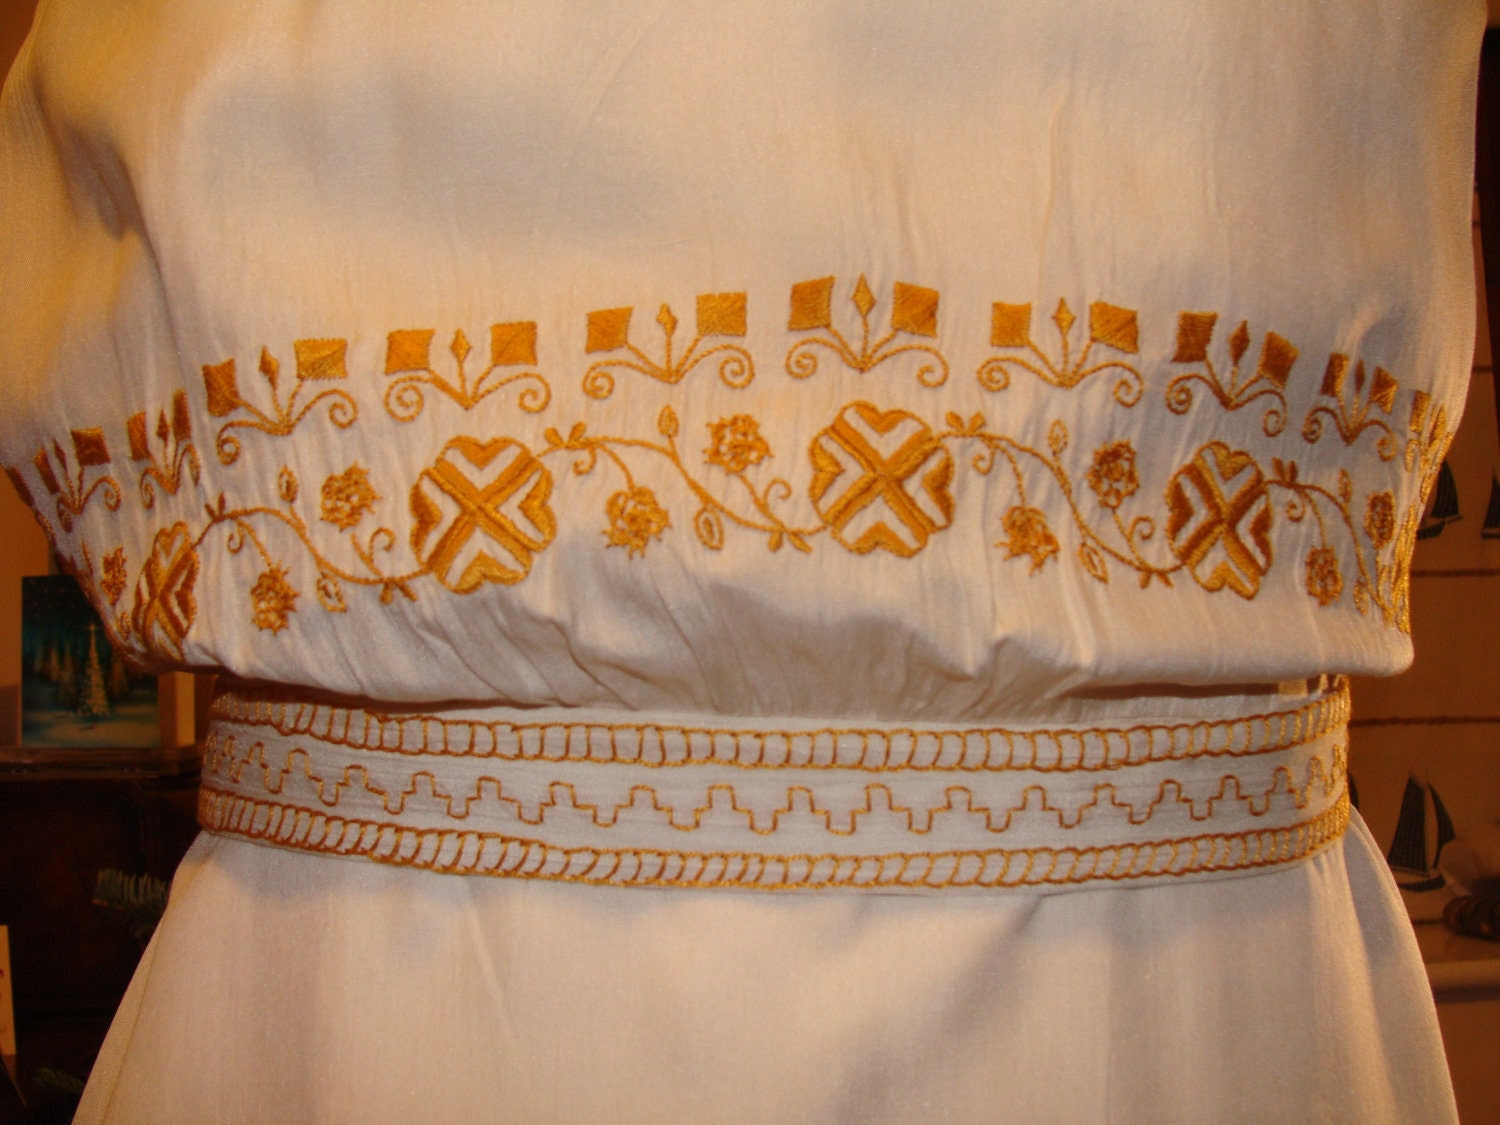 Cream silk 1920s to 1930s dress with ethnic motif embroidery